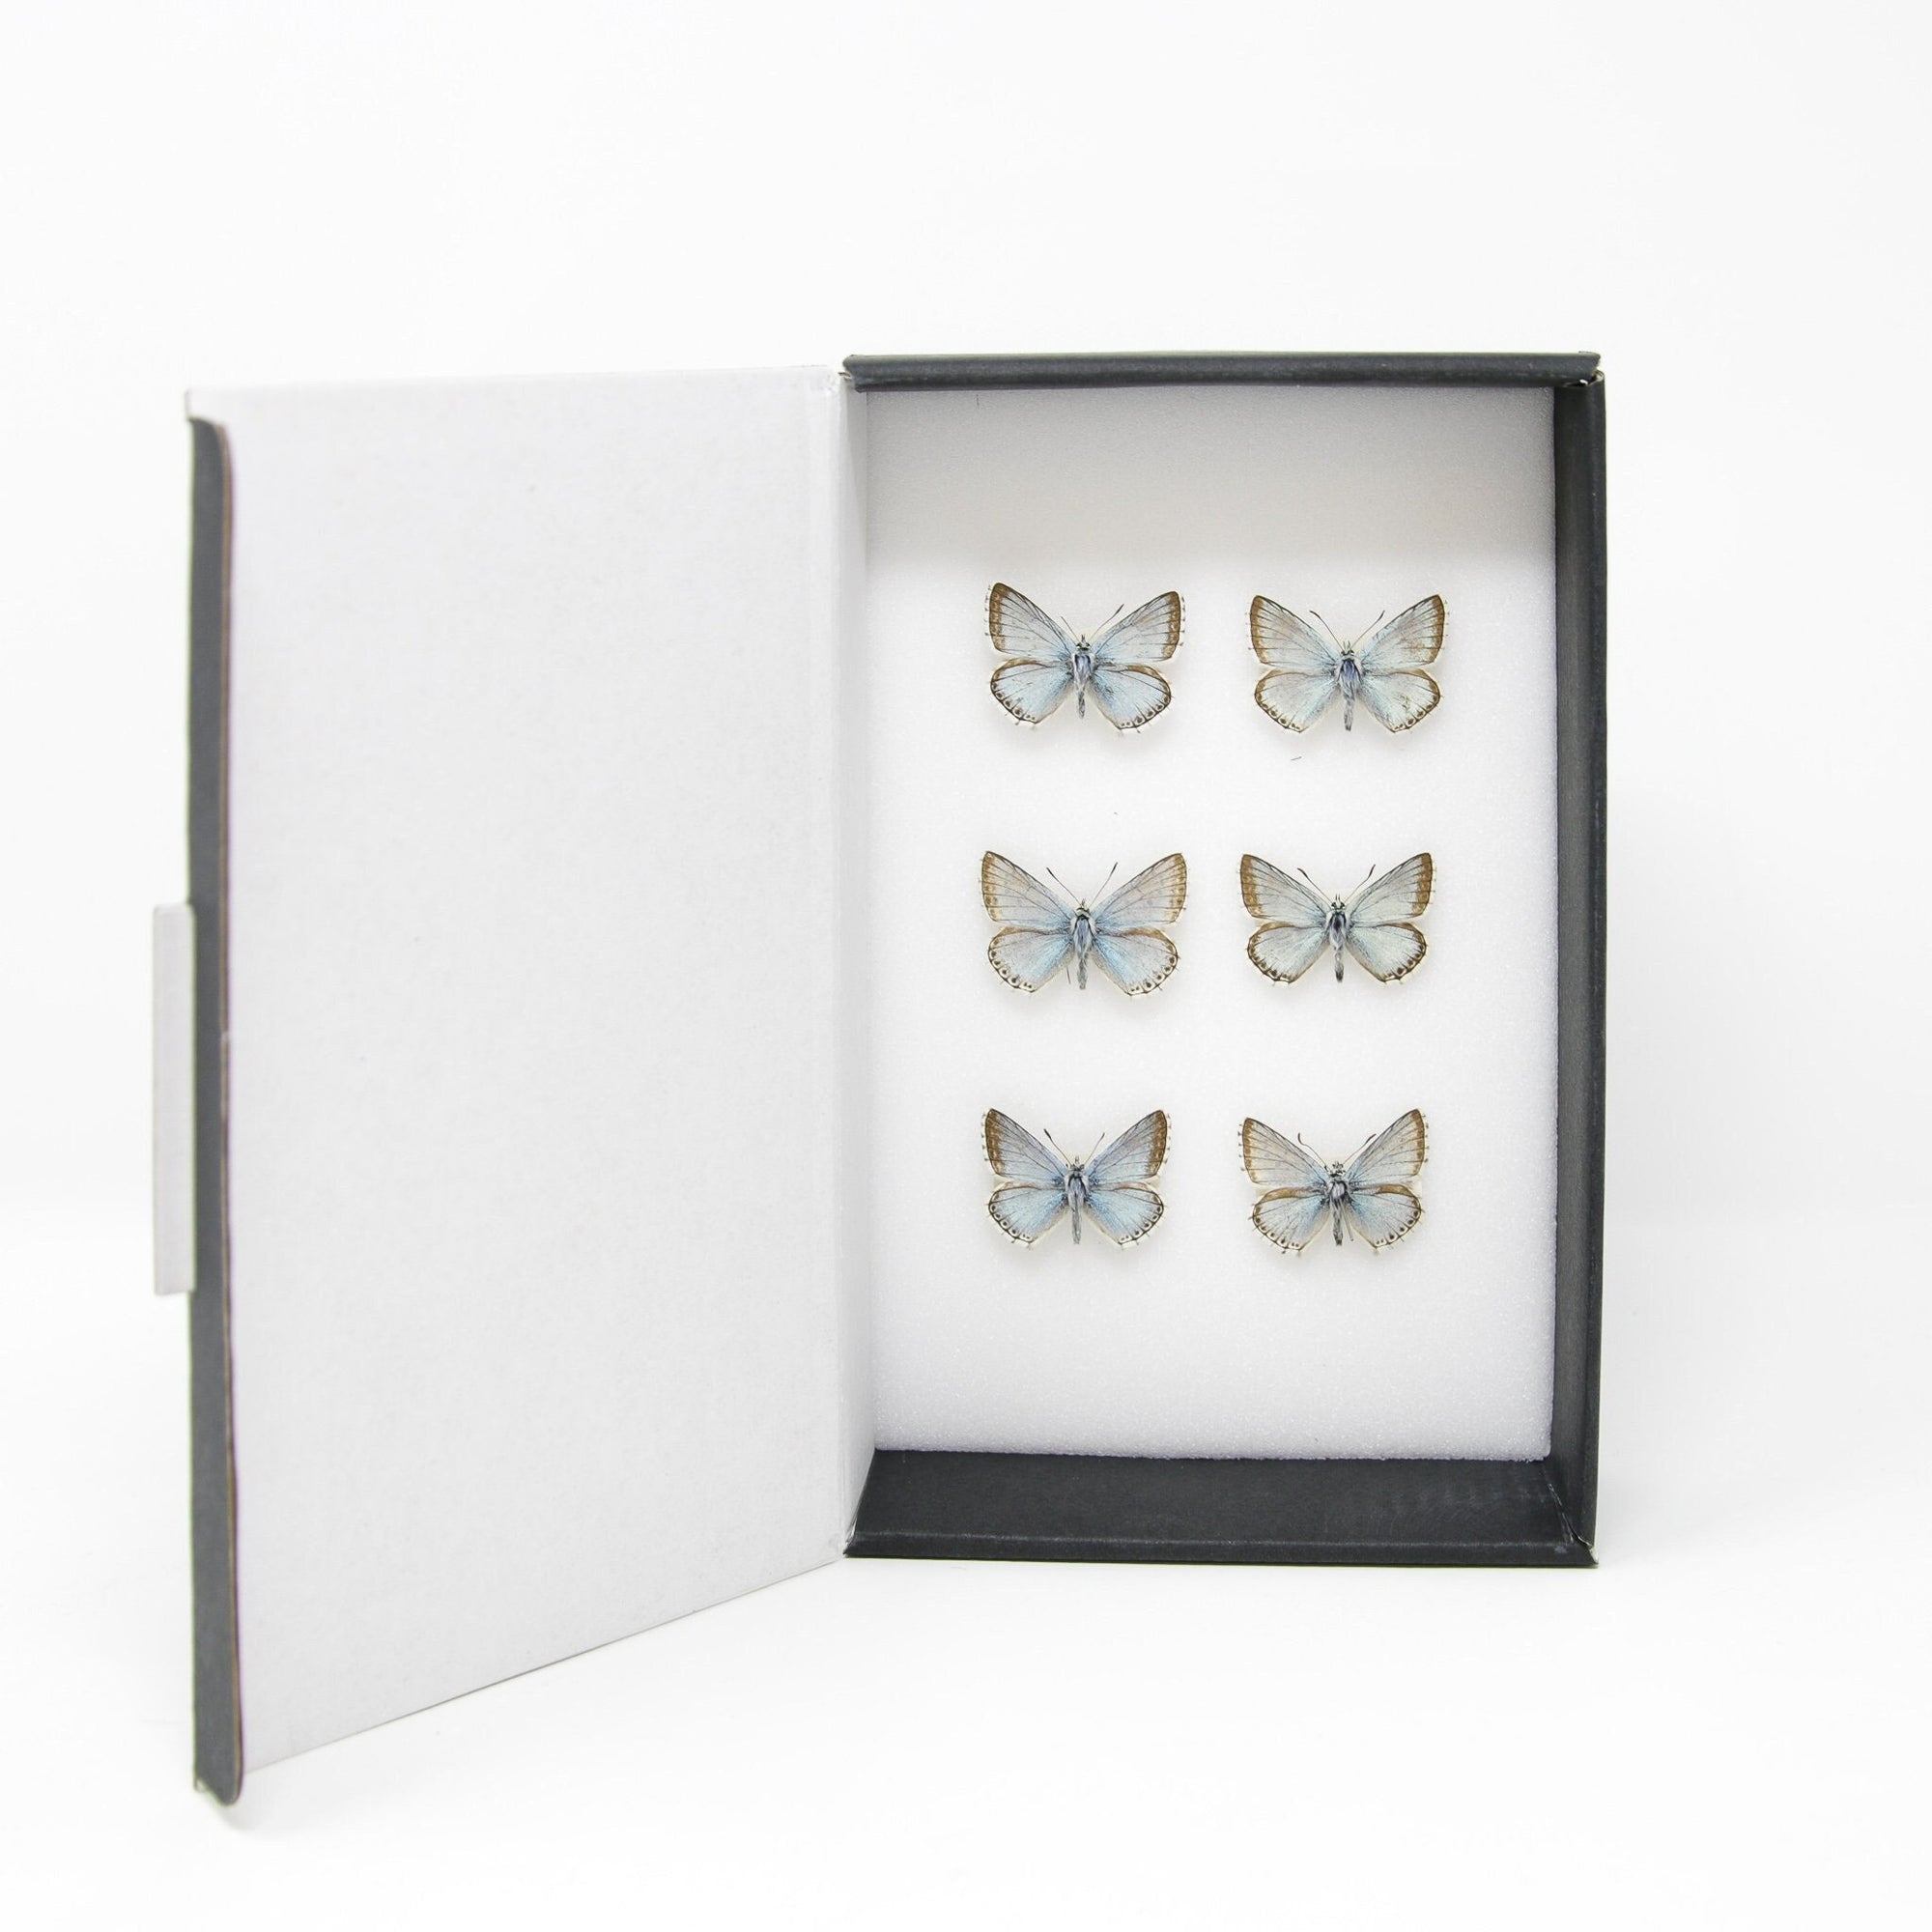 A Collection of Chalkhill Blue Butterflies (Lysandra coridon) with Scientific Collection Data, A1 Quality, Real Lepidoptera Specimens #SE04